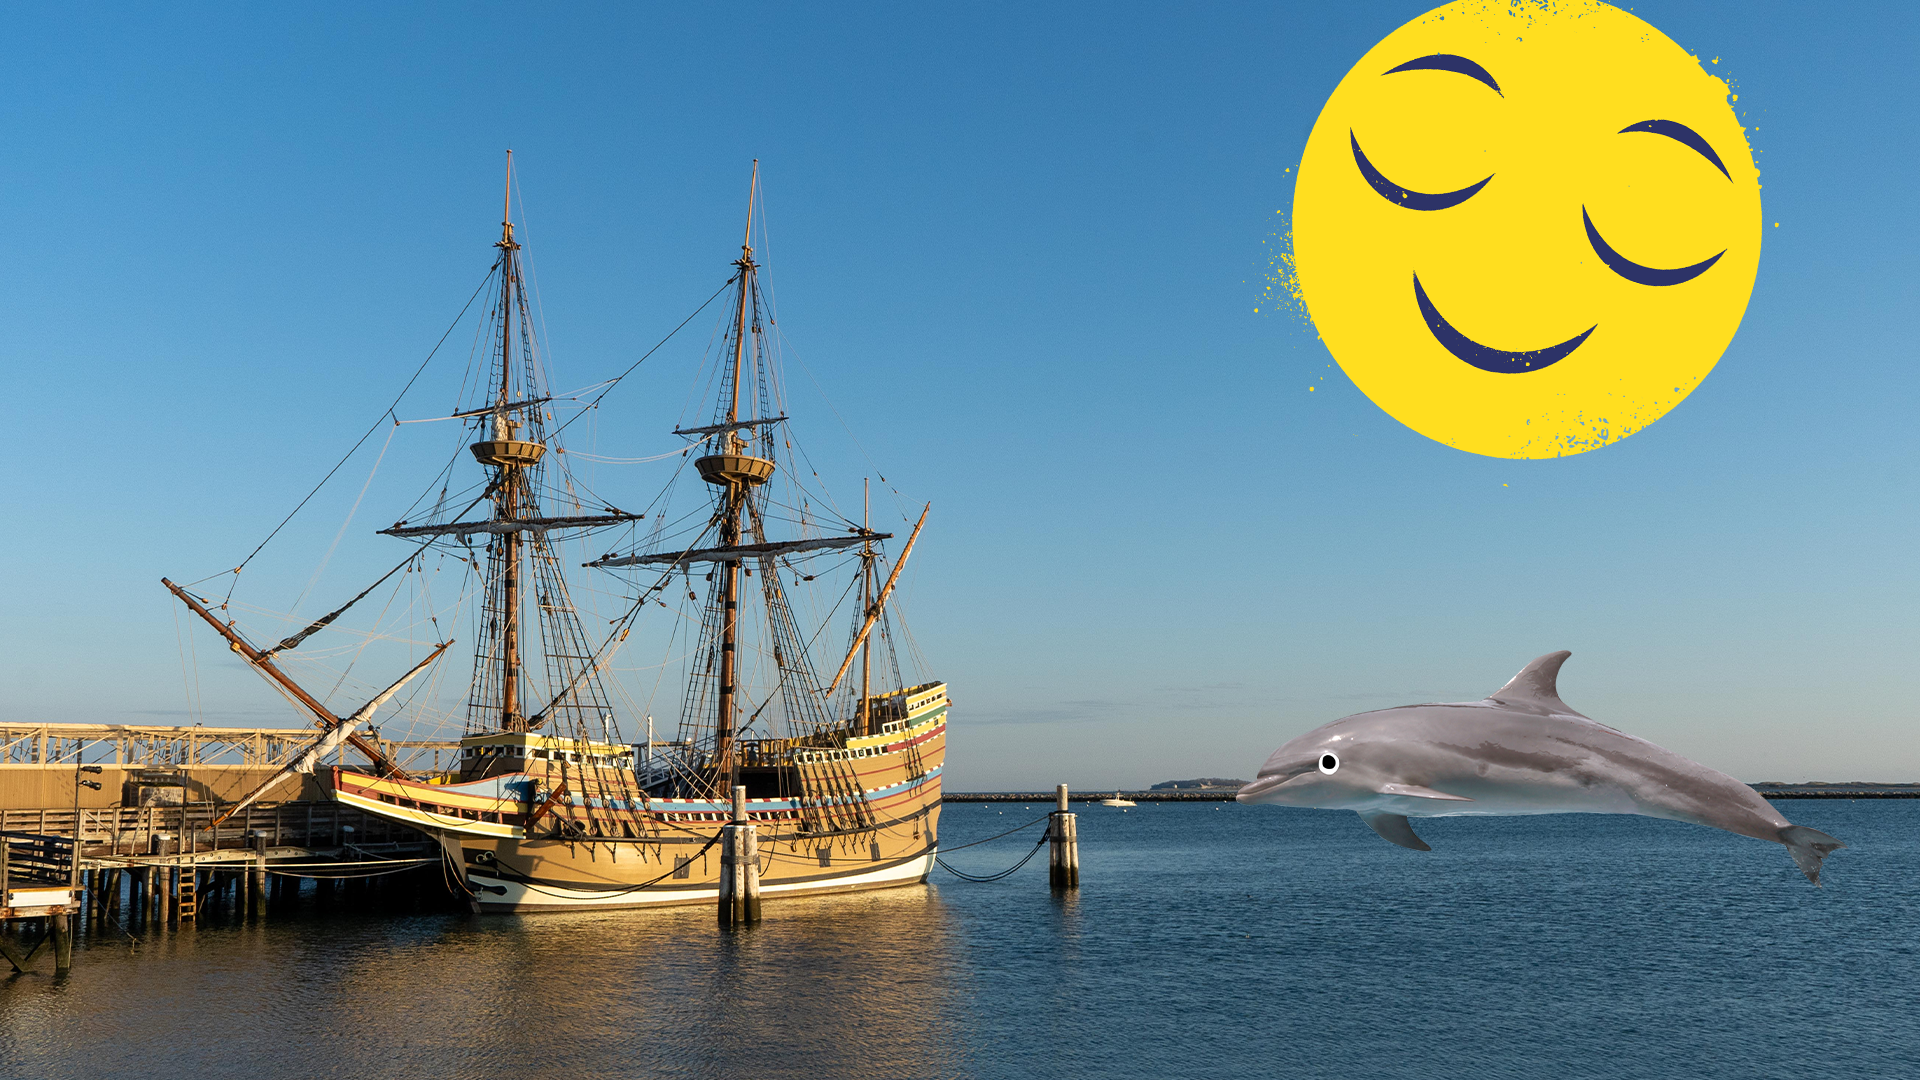 Old ship in bay with Beano dolphin and emoji